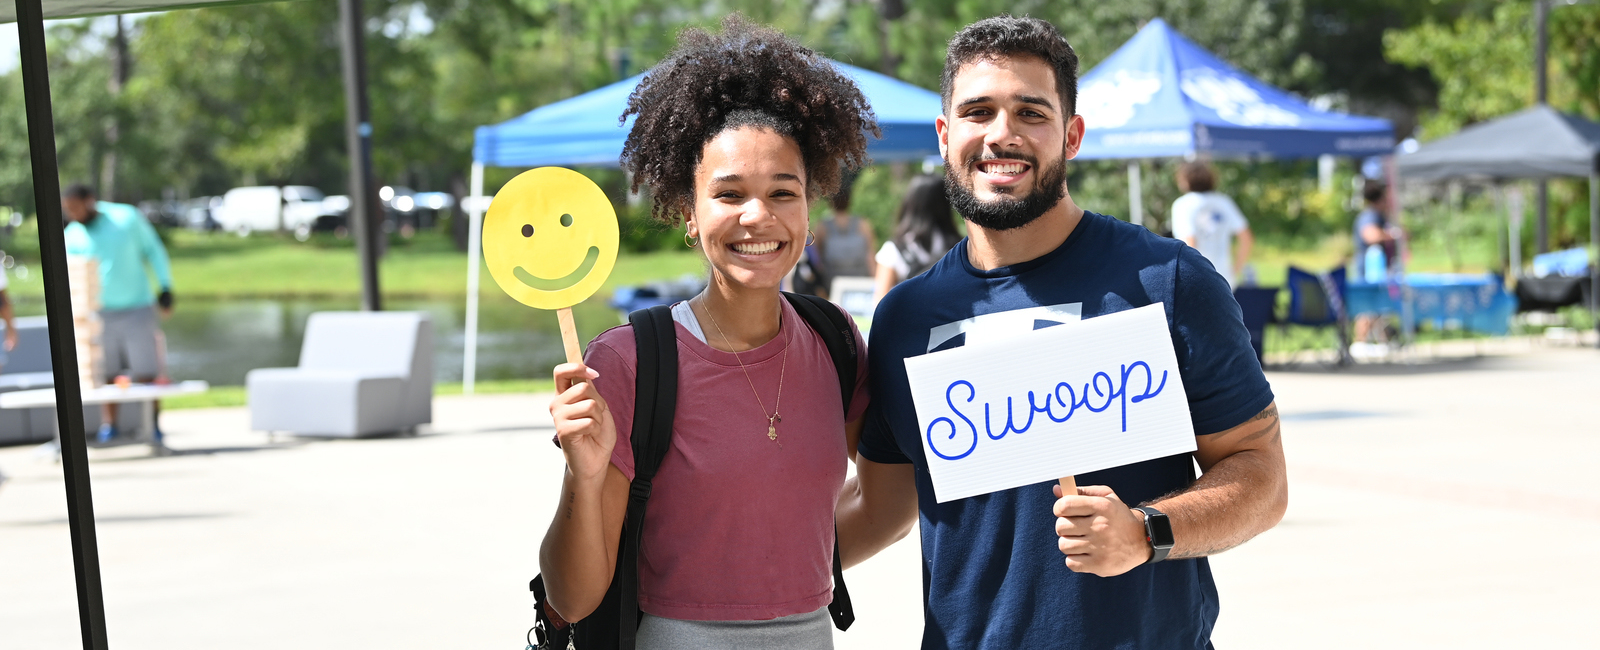 Male holding a Swoop sign and female holding a smiley face sign while both smiling outside the student union